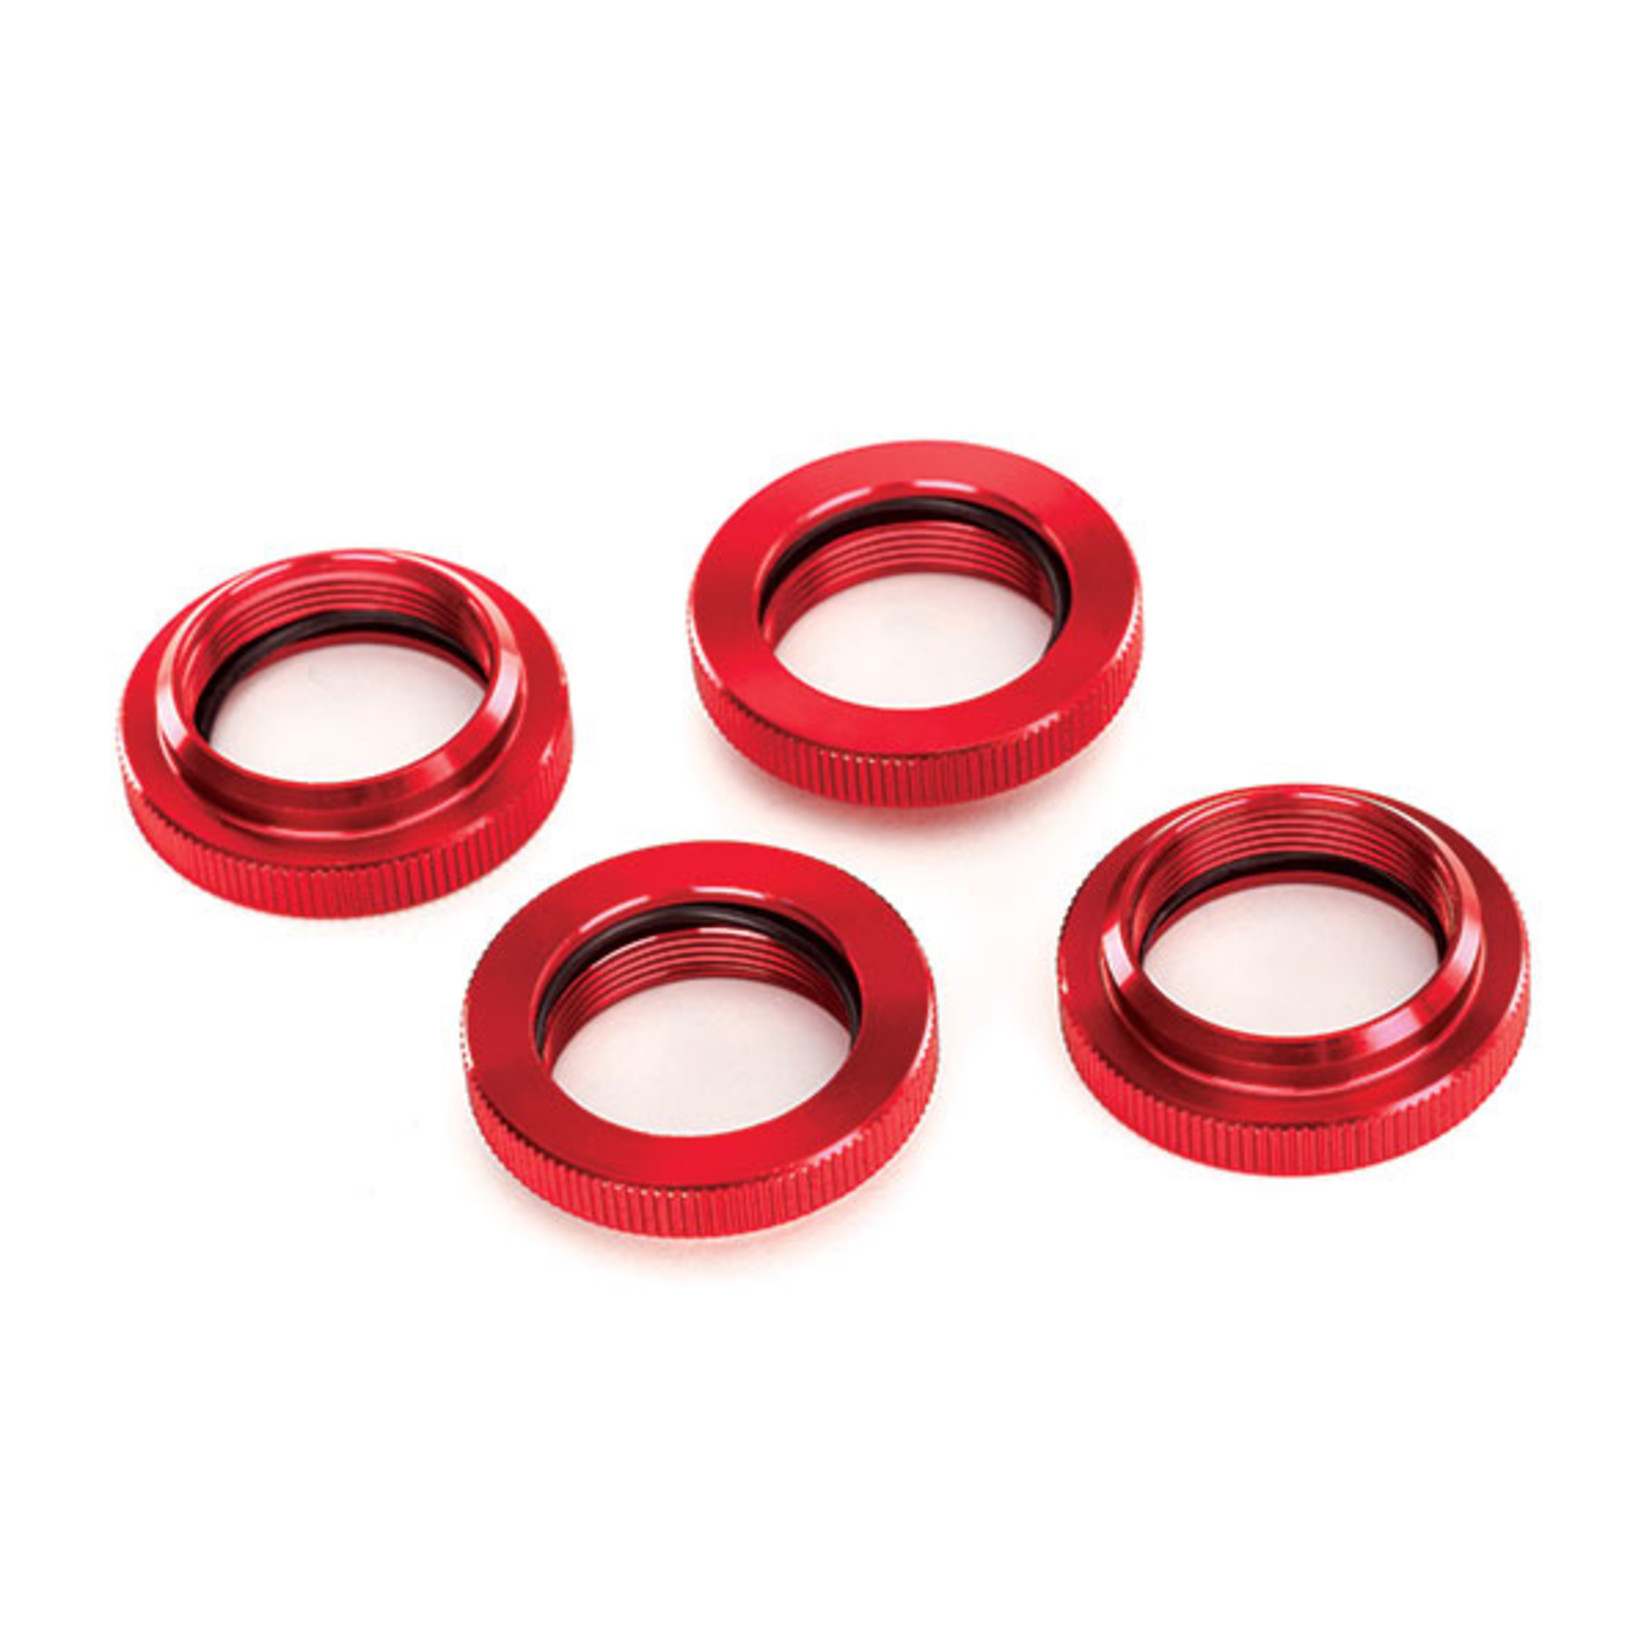 Traxxas 7767R - Spring retainer (adjuster), red-anodized a